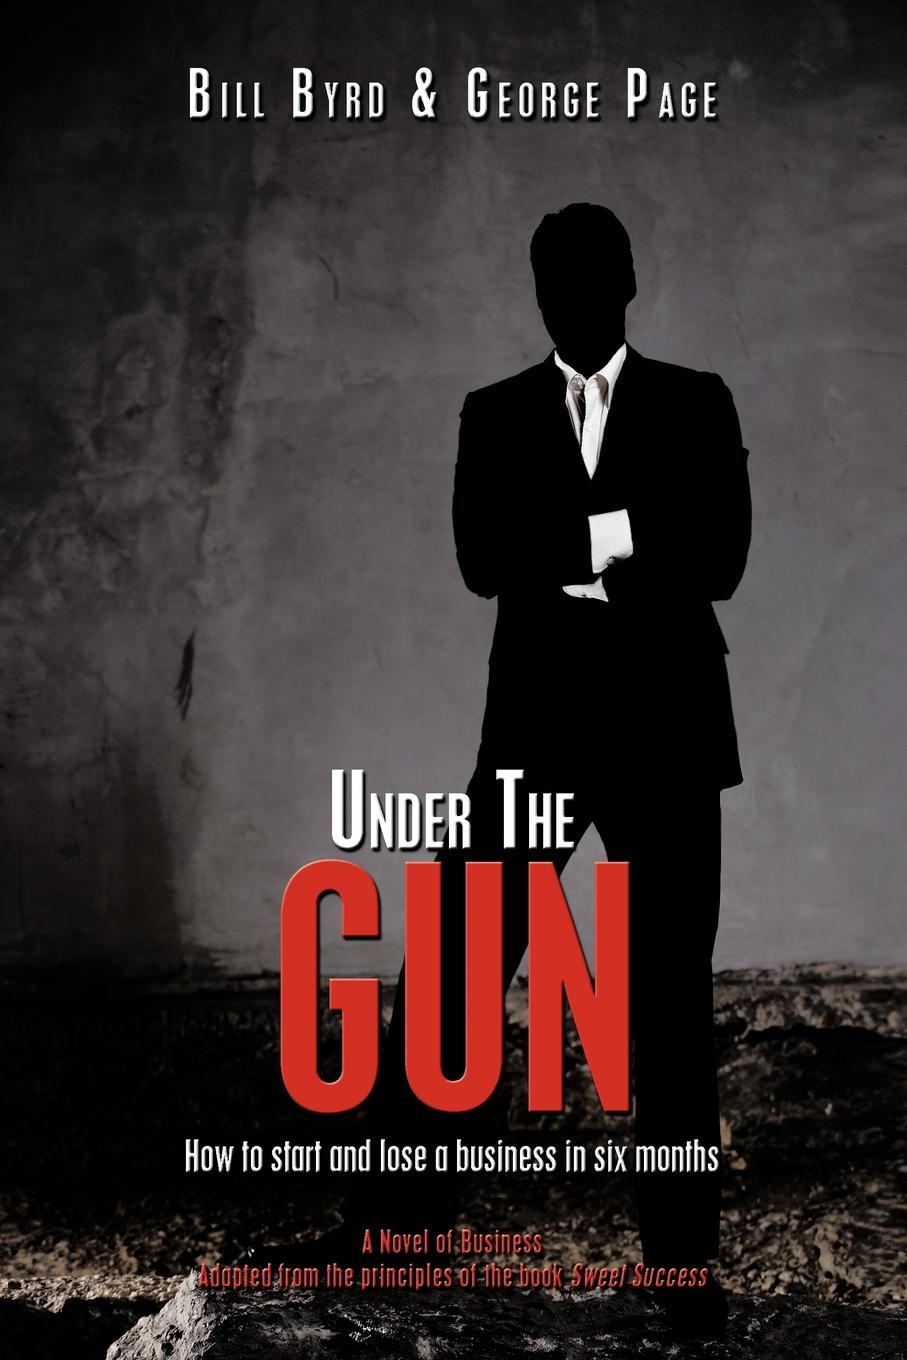 Under the Gun. How to Start and Lose a Business in Six Months